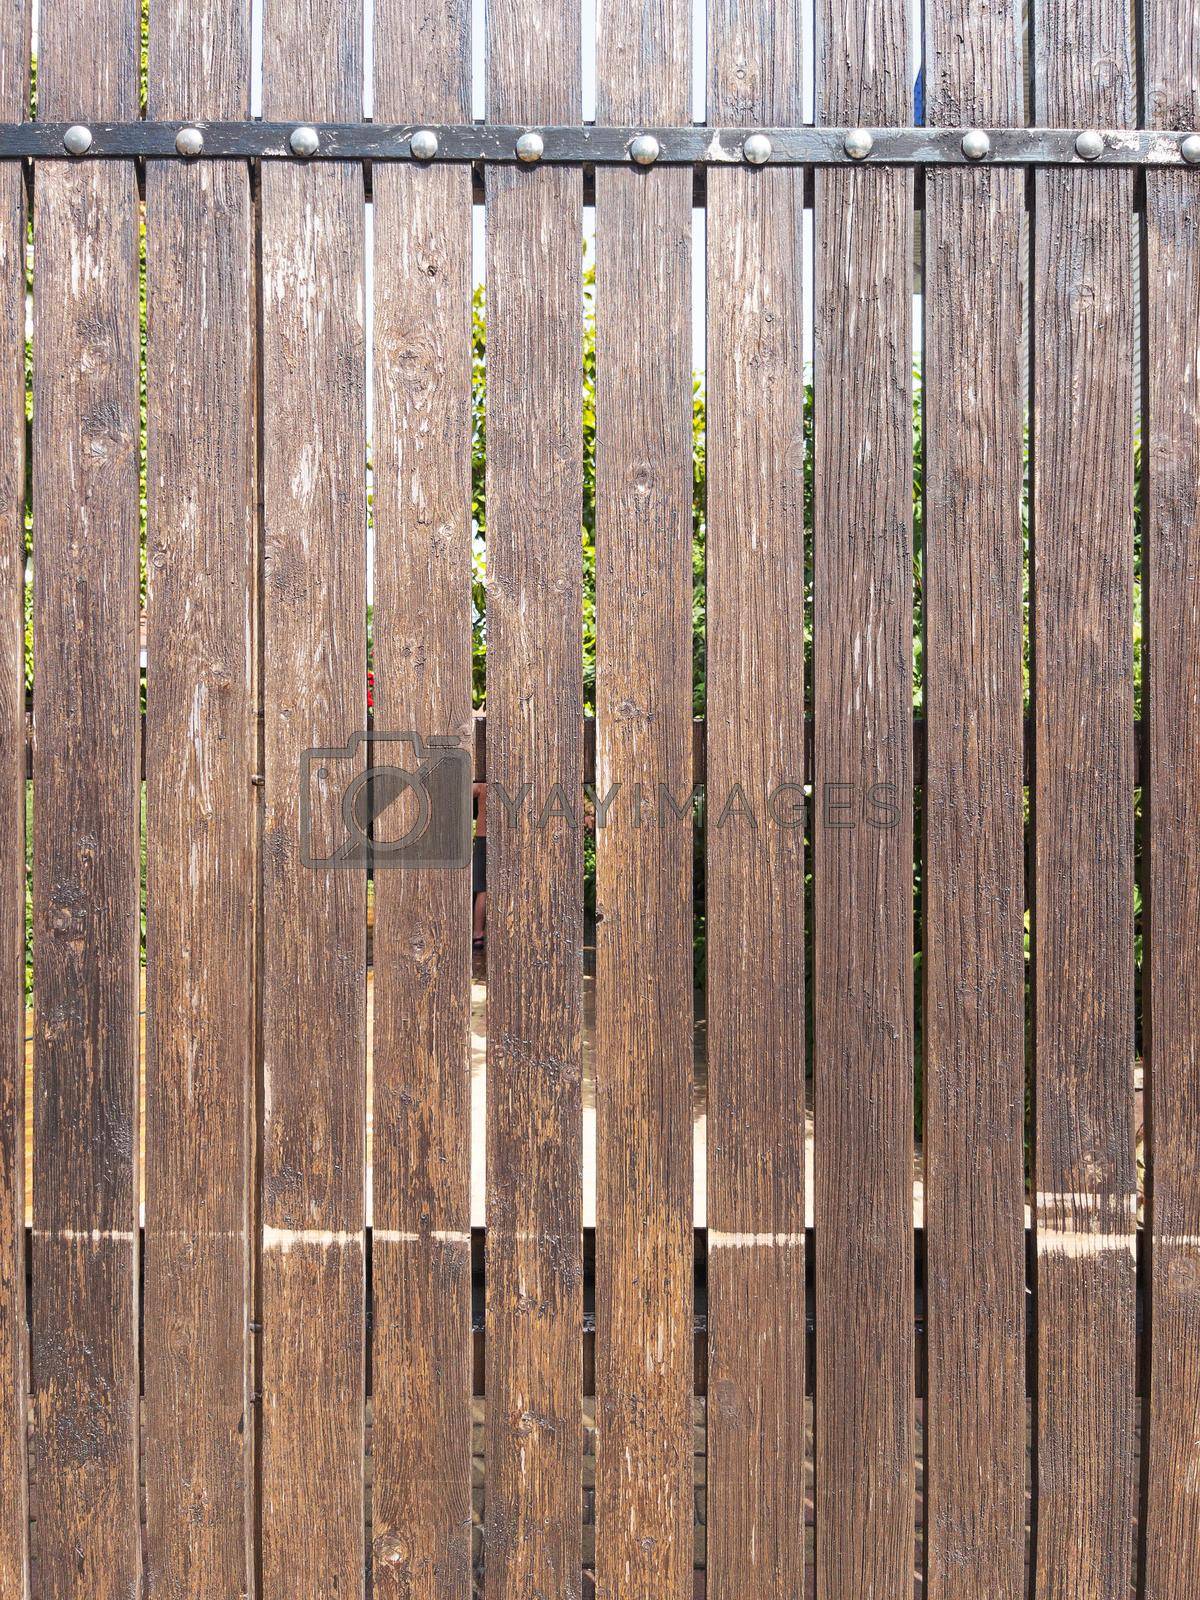 Royalty free image of Fence made of vertical boards of natural wood by AlexGrec